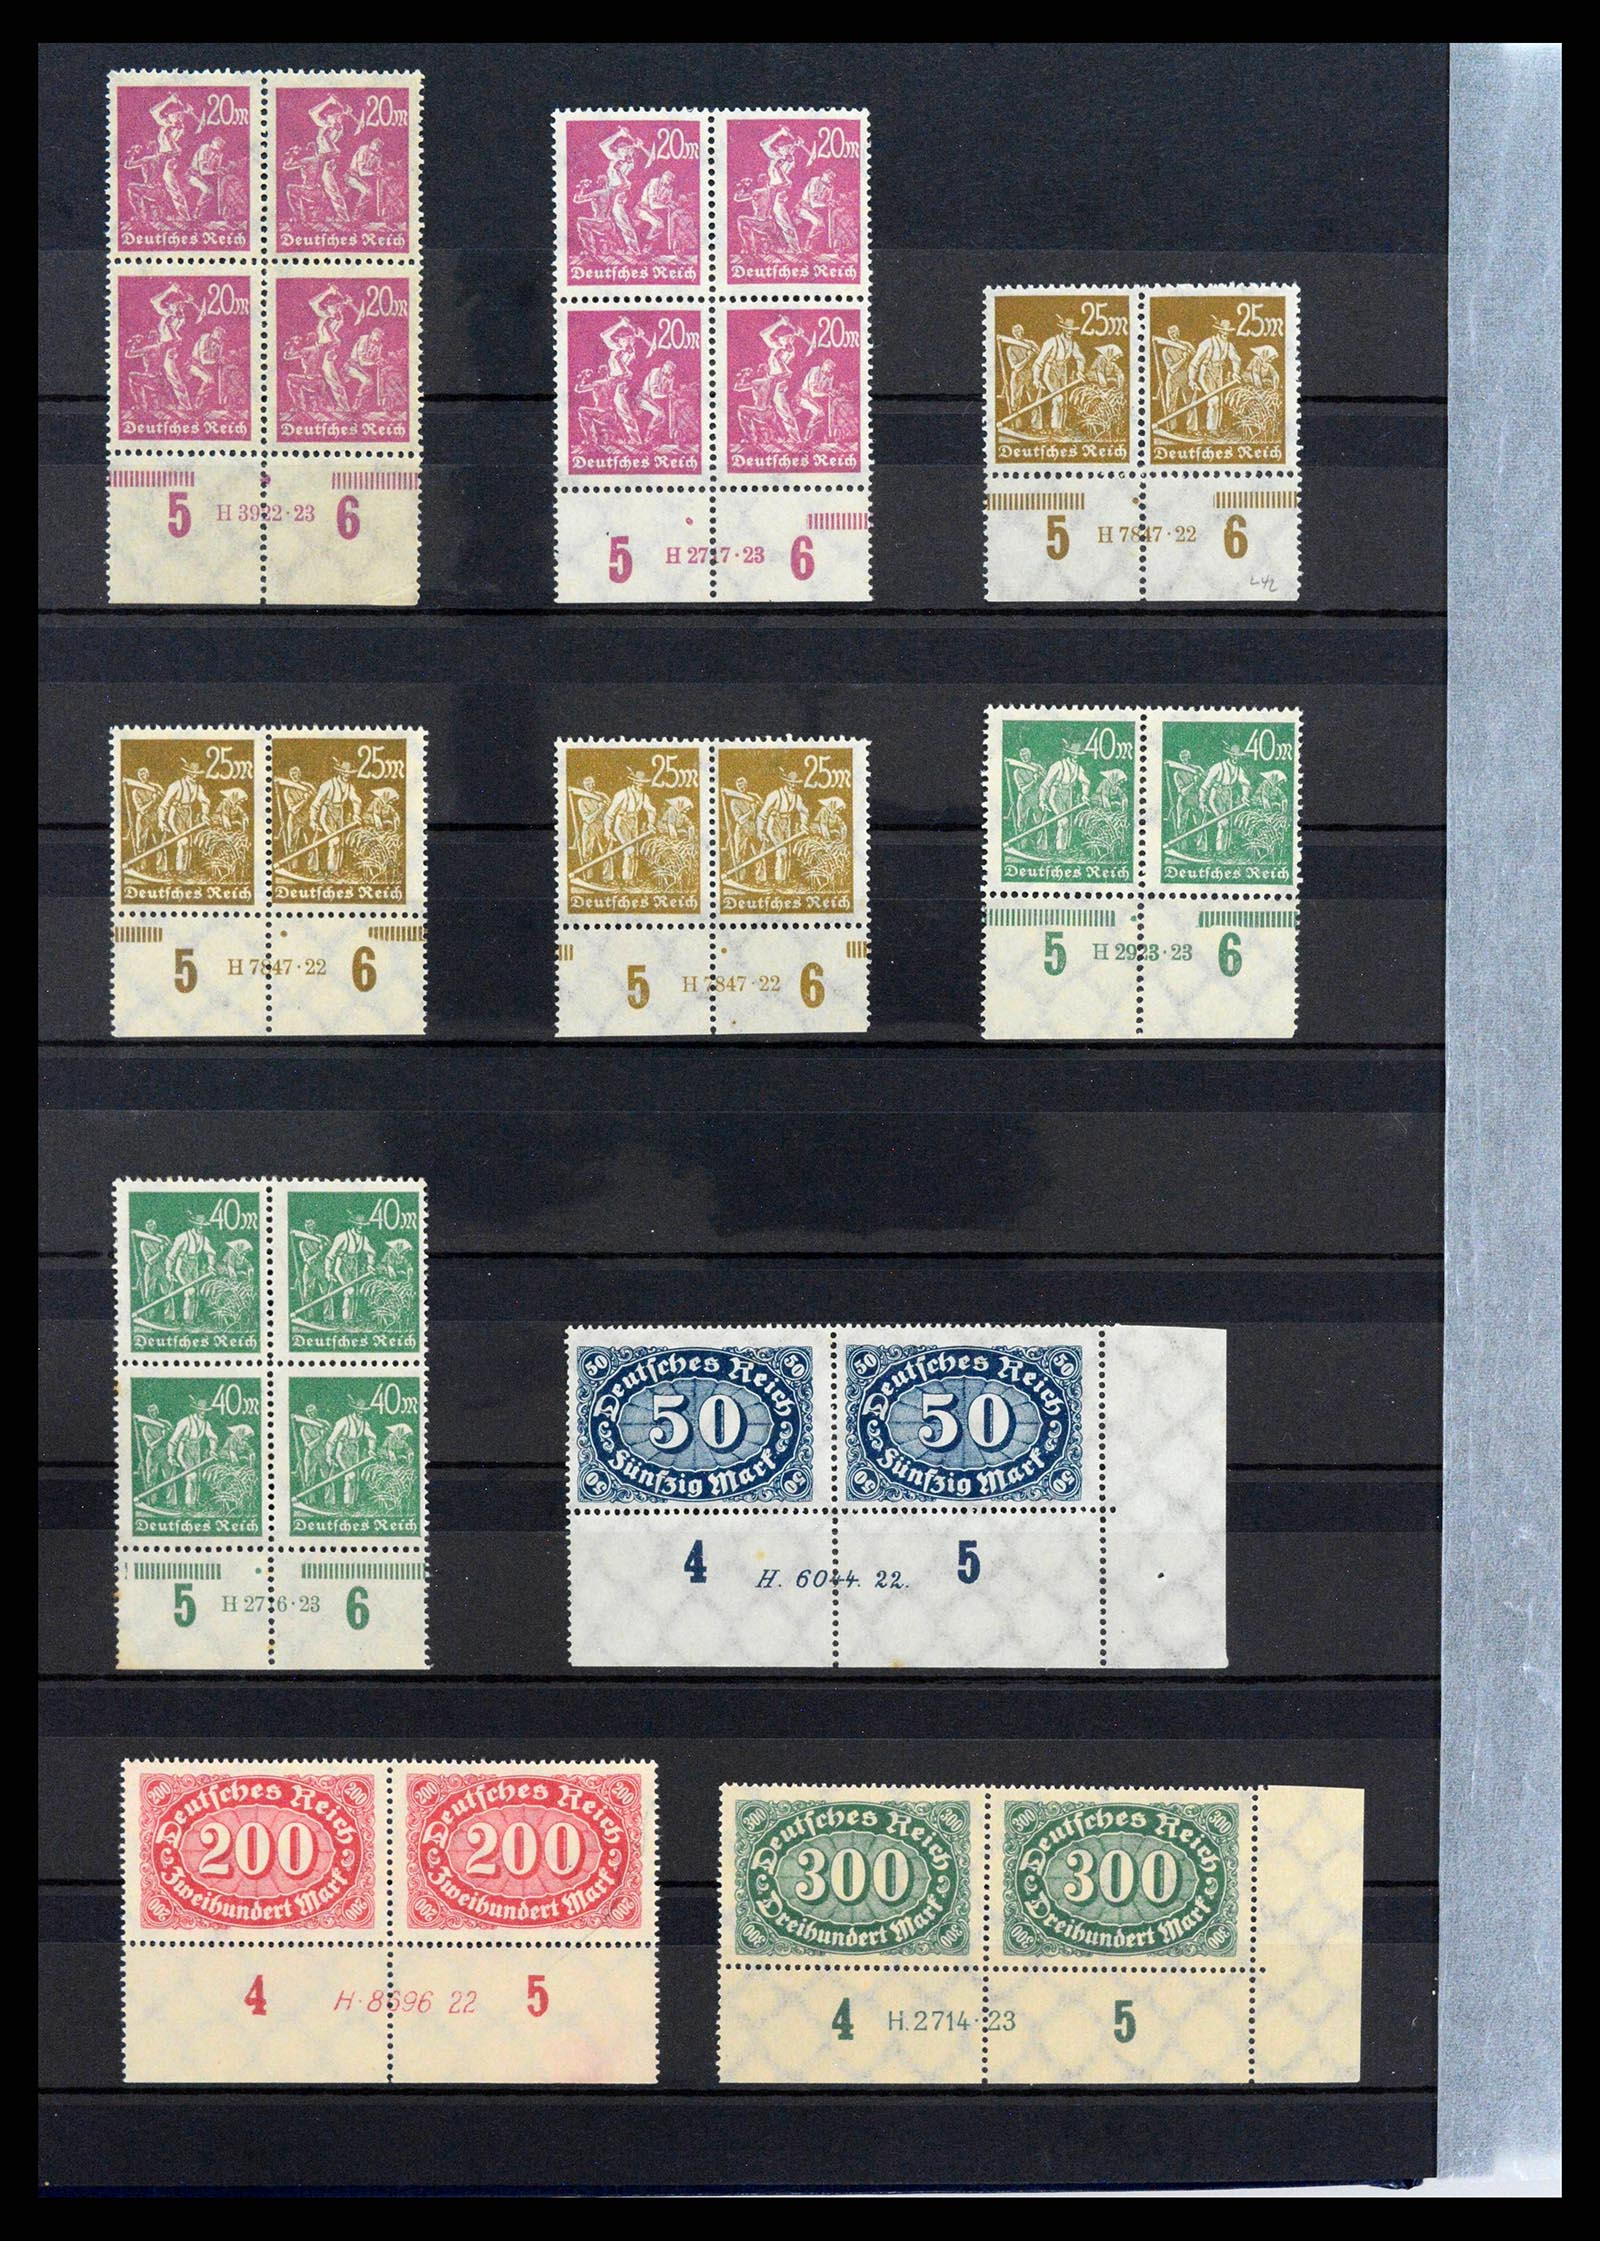 38417 0007 - Stamp collection 38417 German Reich infla 1922-1923.